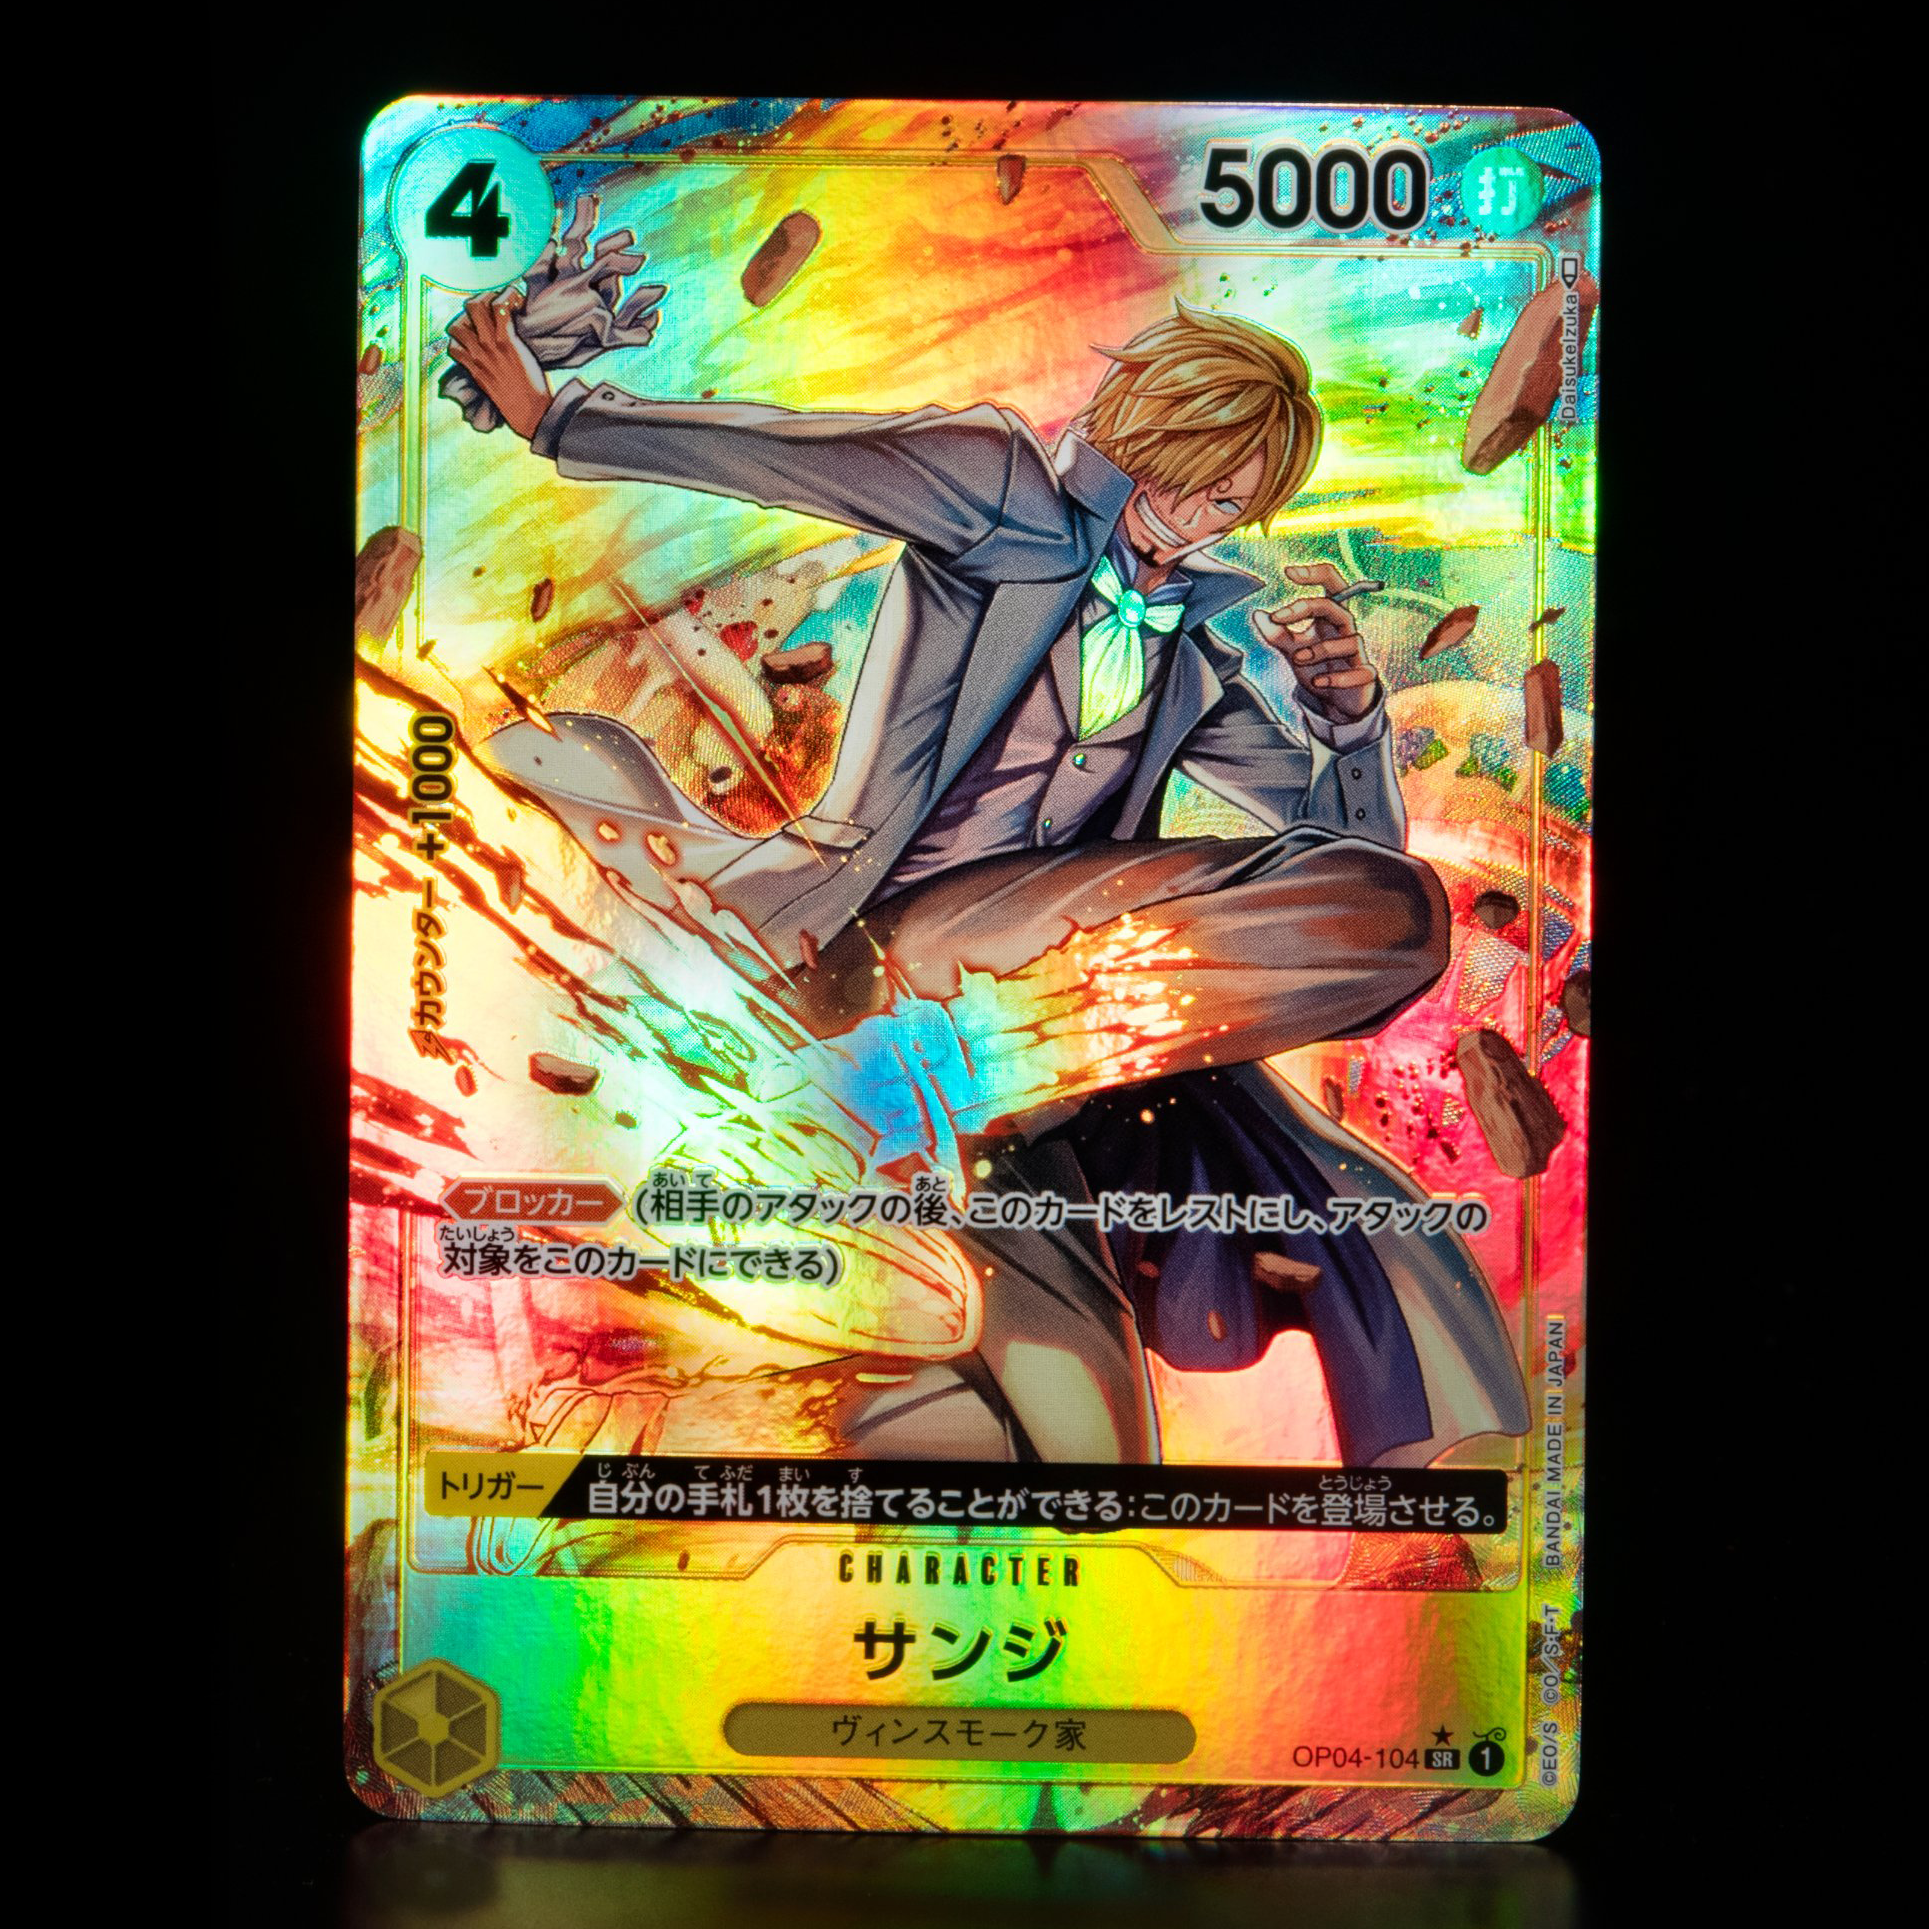 ONE PIECE CARD GAME ｢Kingdoms of Intrigue｣  ONE PIECE CARD GAME OP04-104 Super Rare Parallel card  Sanji